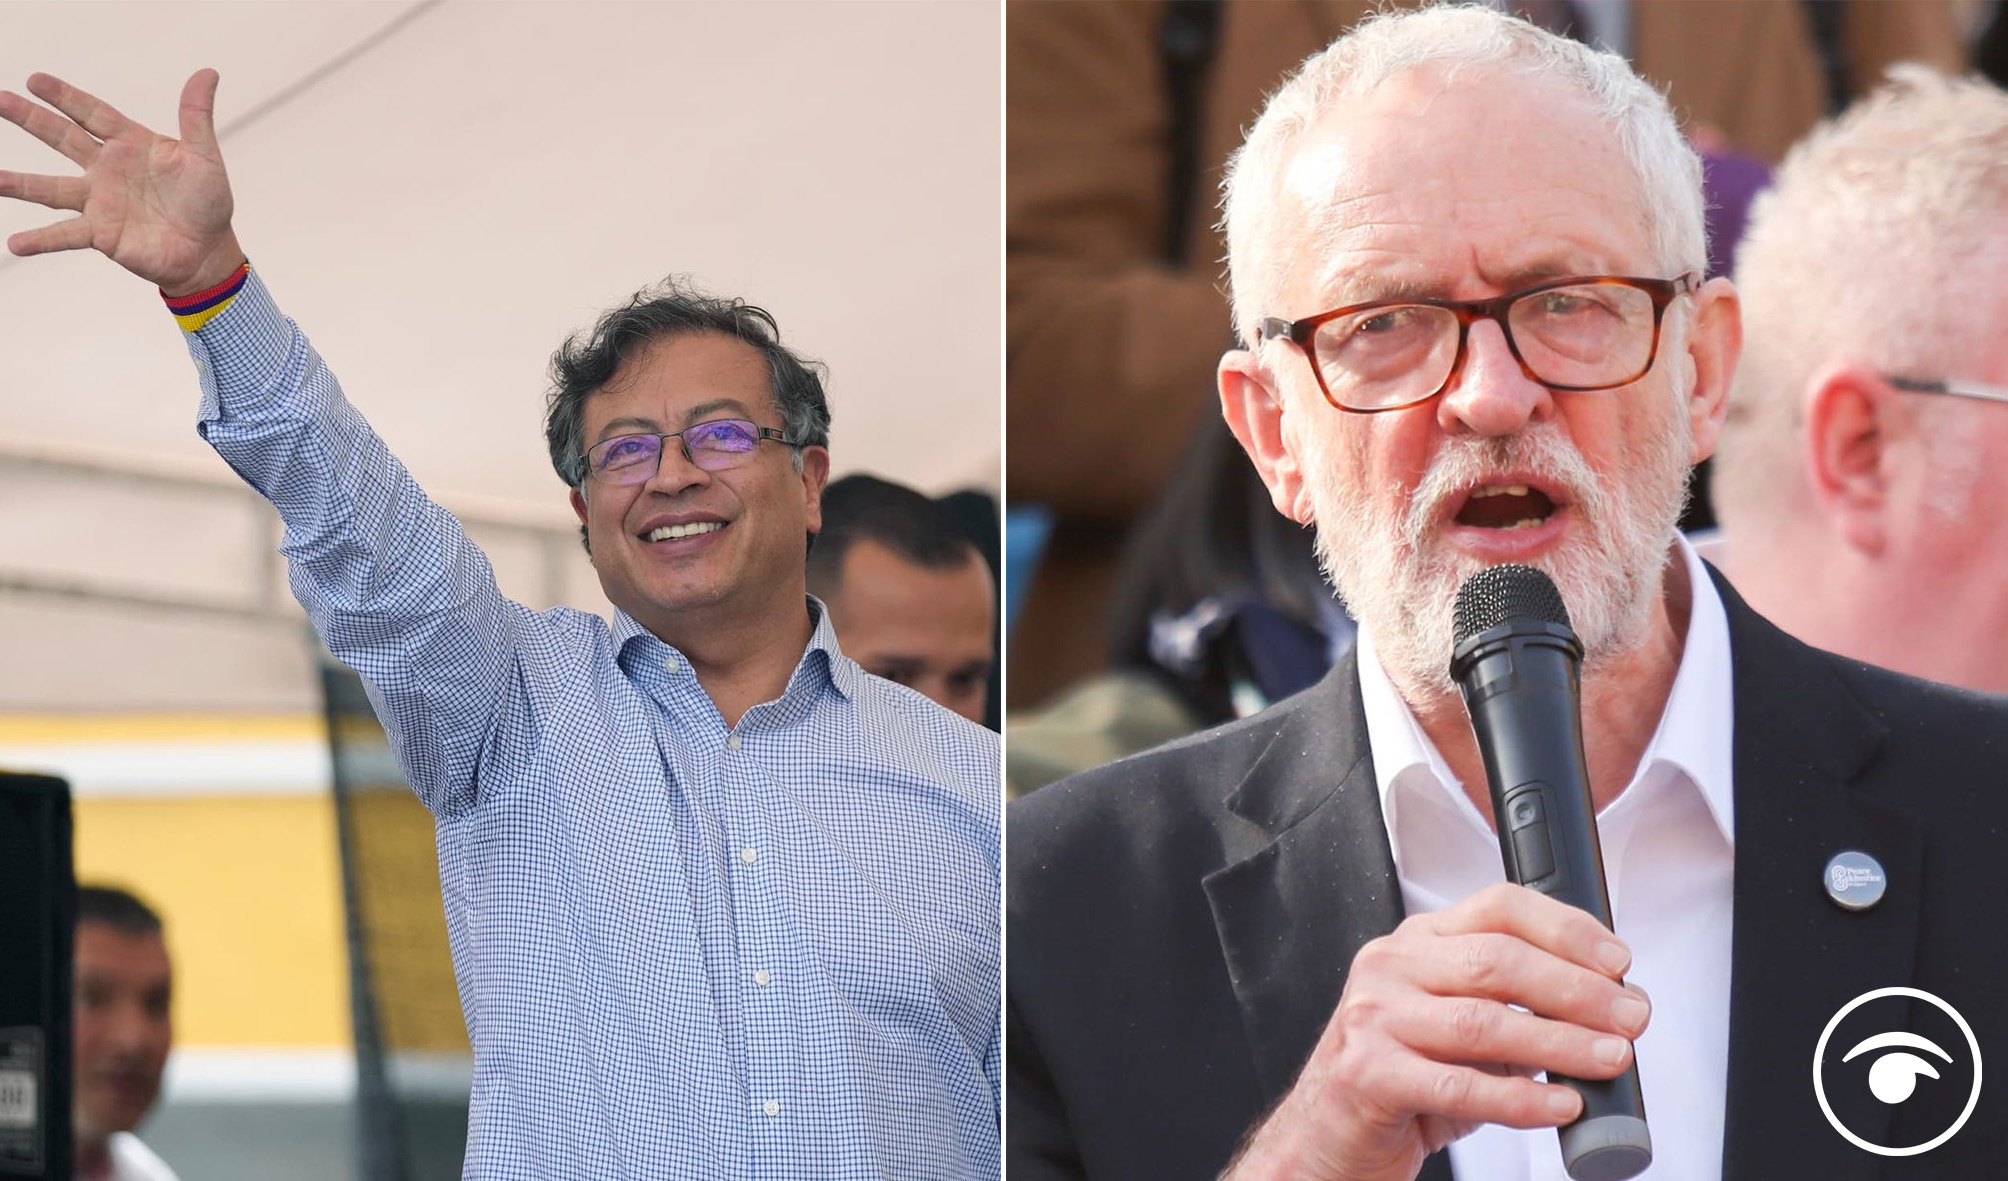 Corbyn sends message to Columbia as they elect first left-wing president